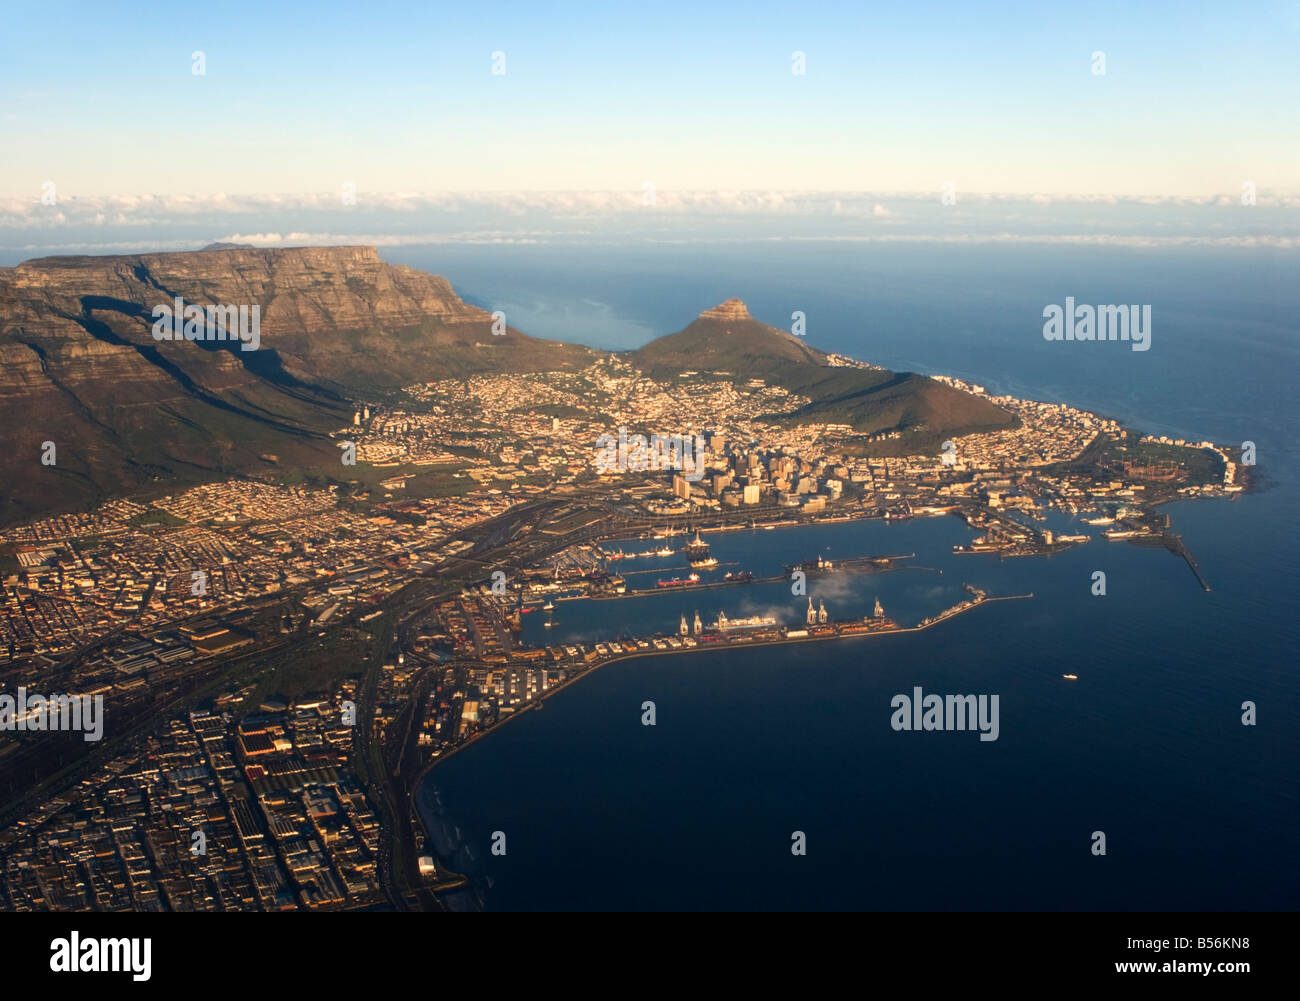 An Aerial View Over Cape Town, South Africa Stock Photo